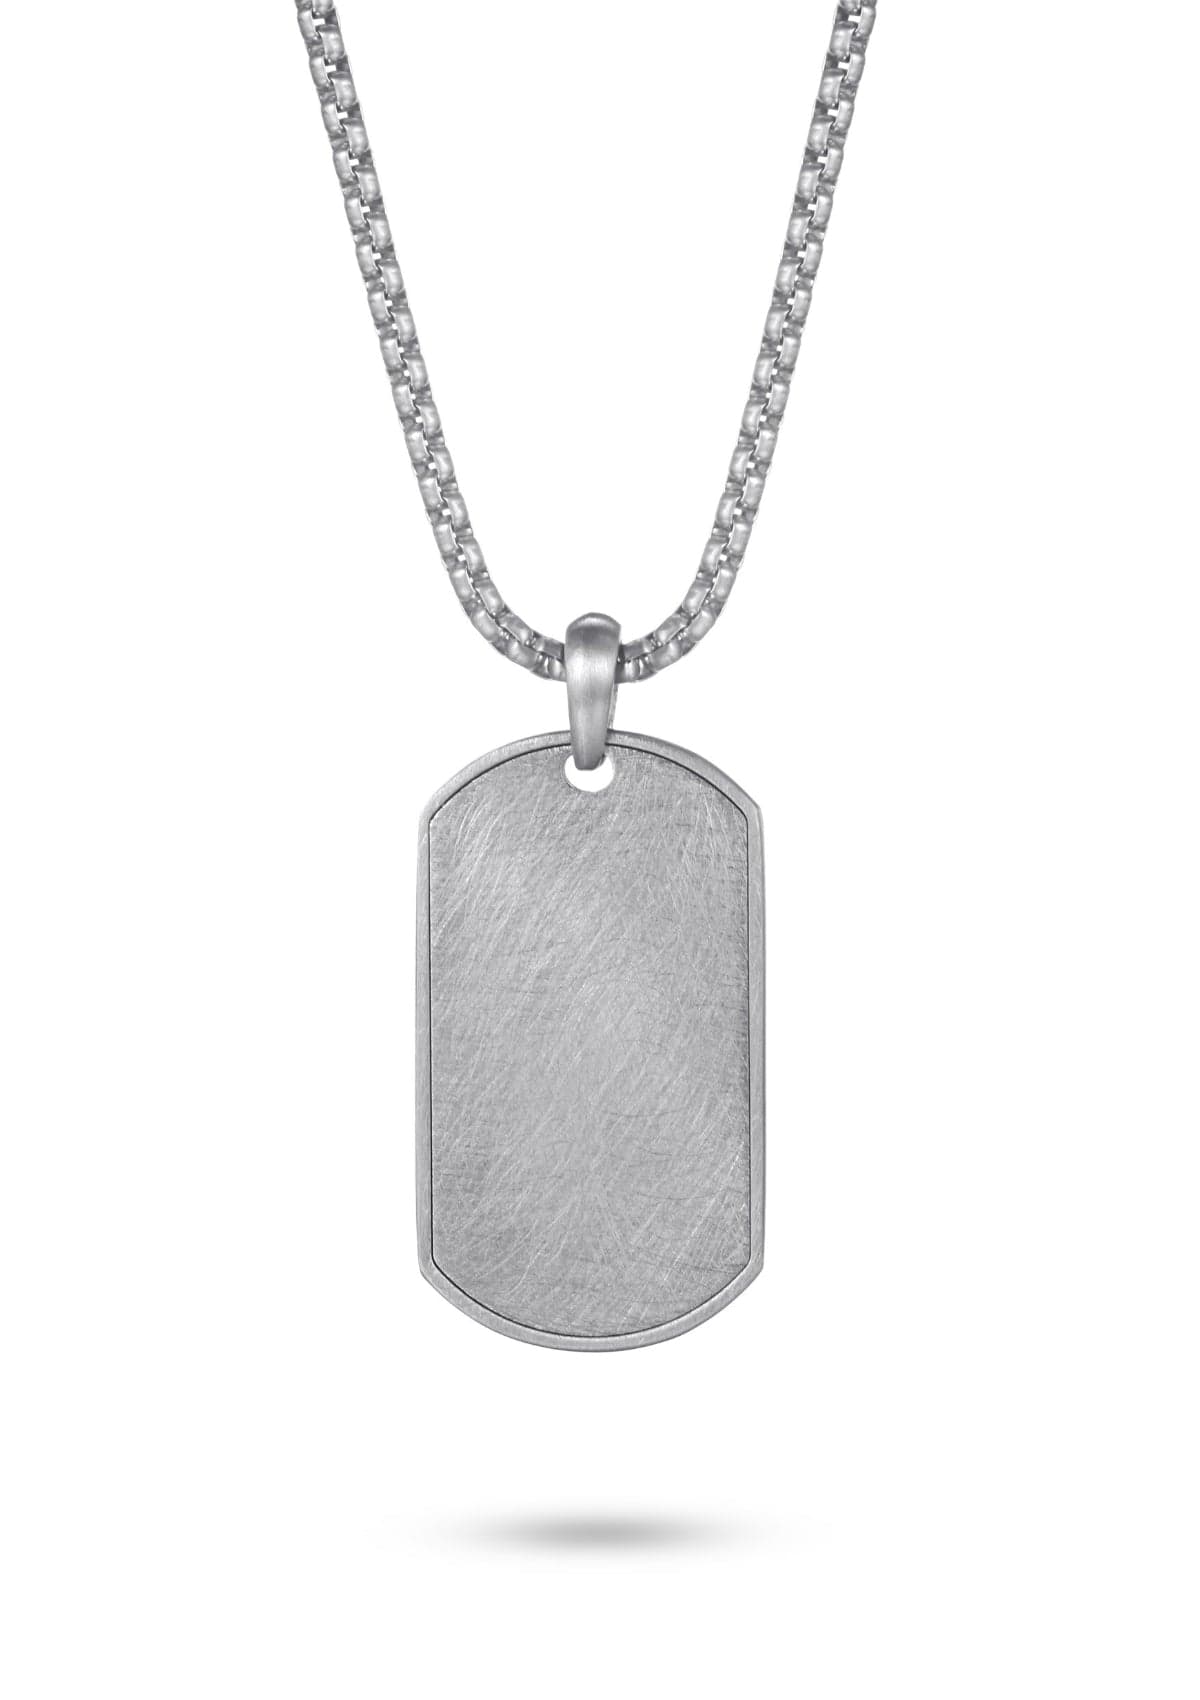 Stainless Steel Dog Tag - Silver